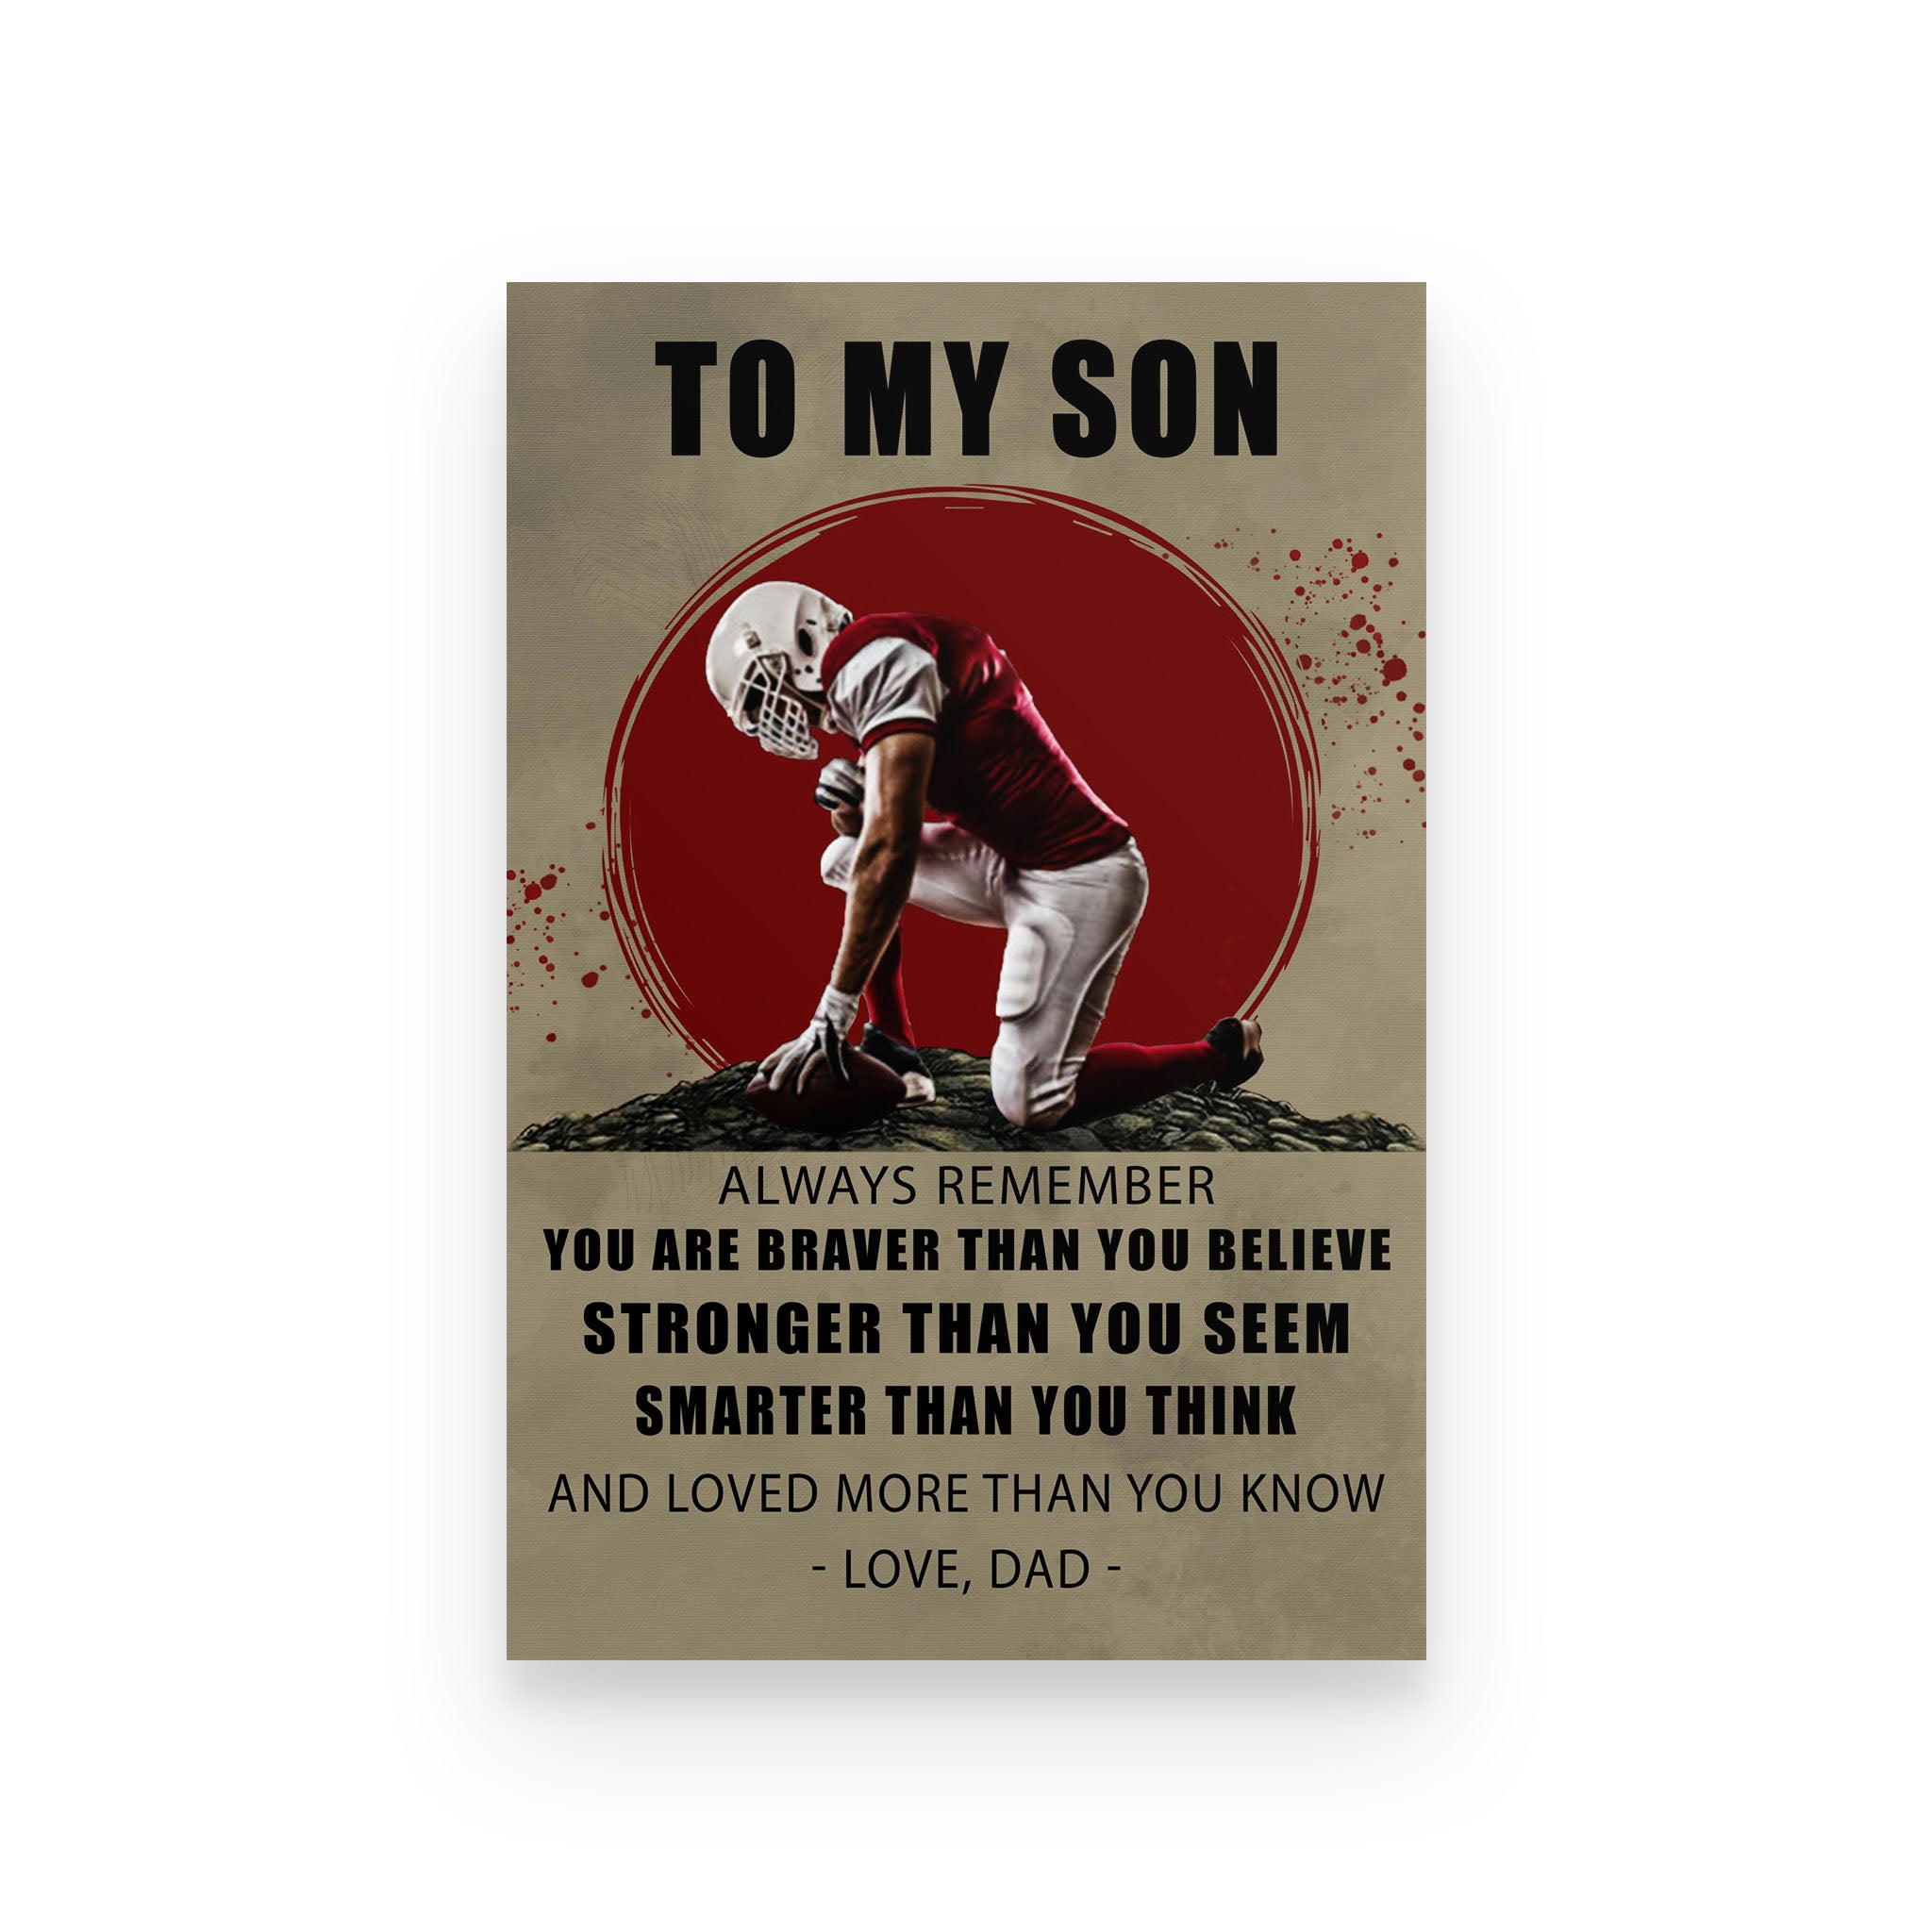 American football poster dad to son always remember you are braver than you believe+